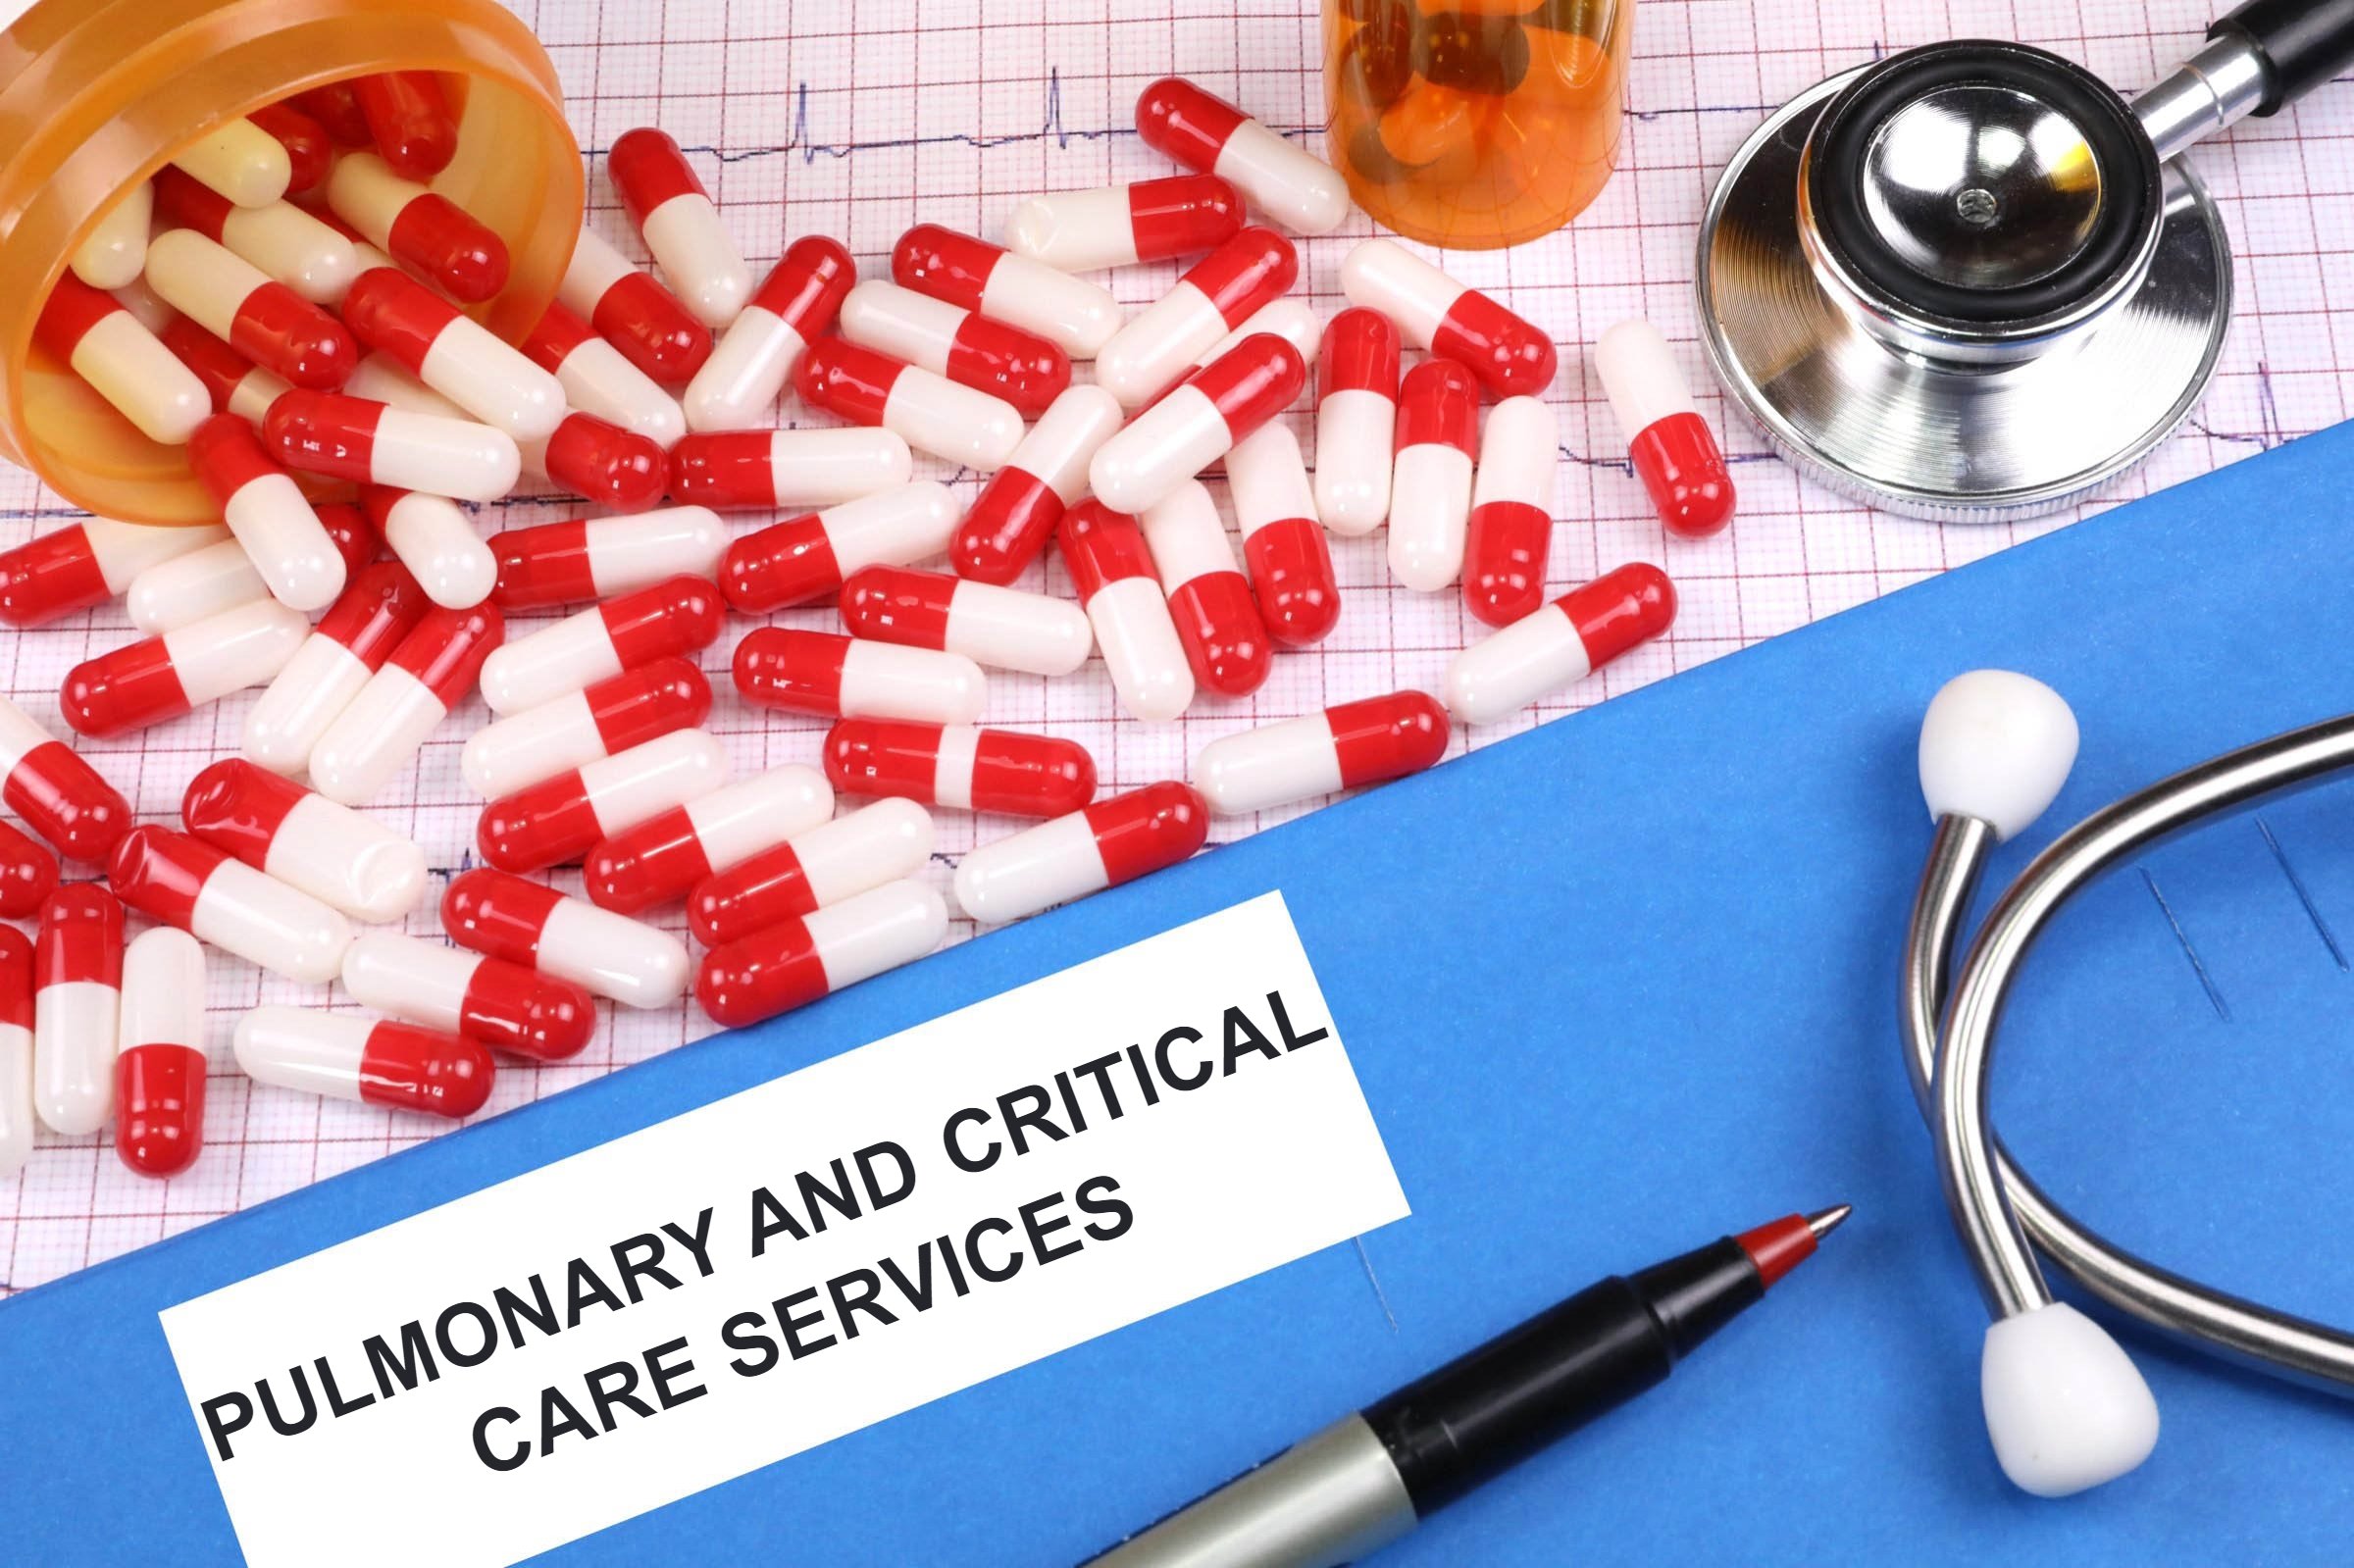 pulmonary and critical care services